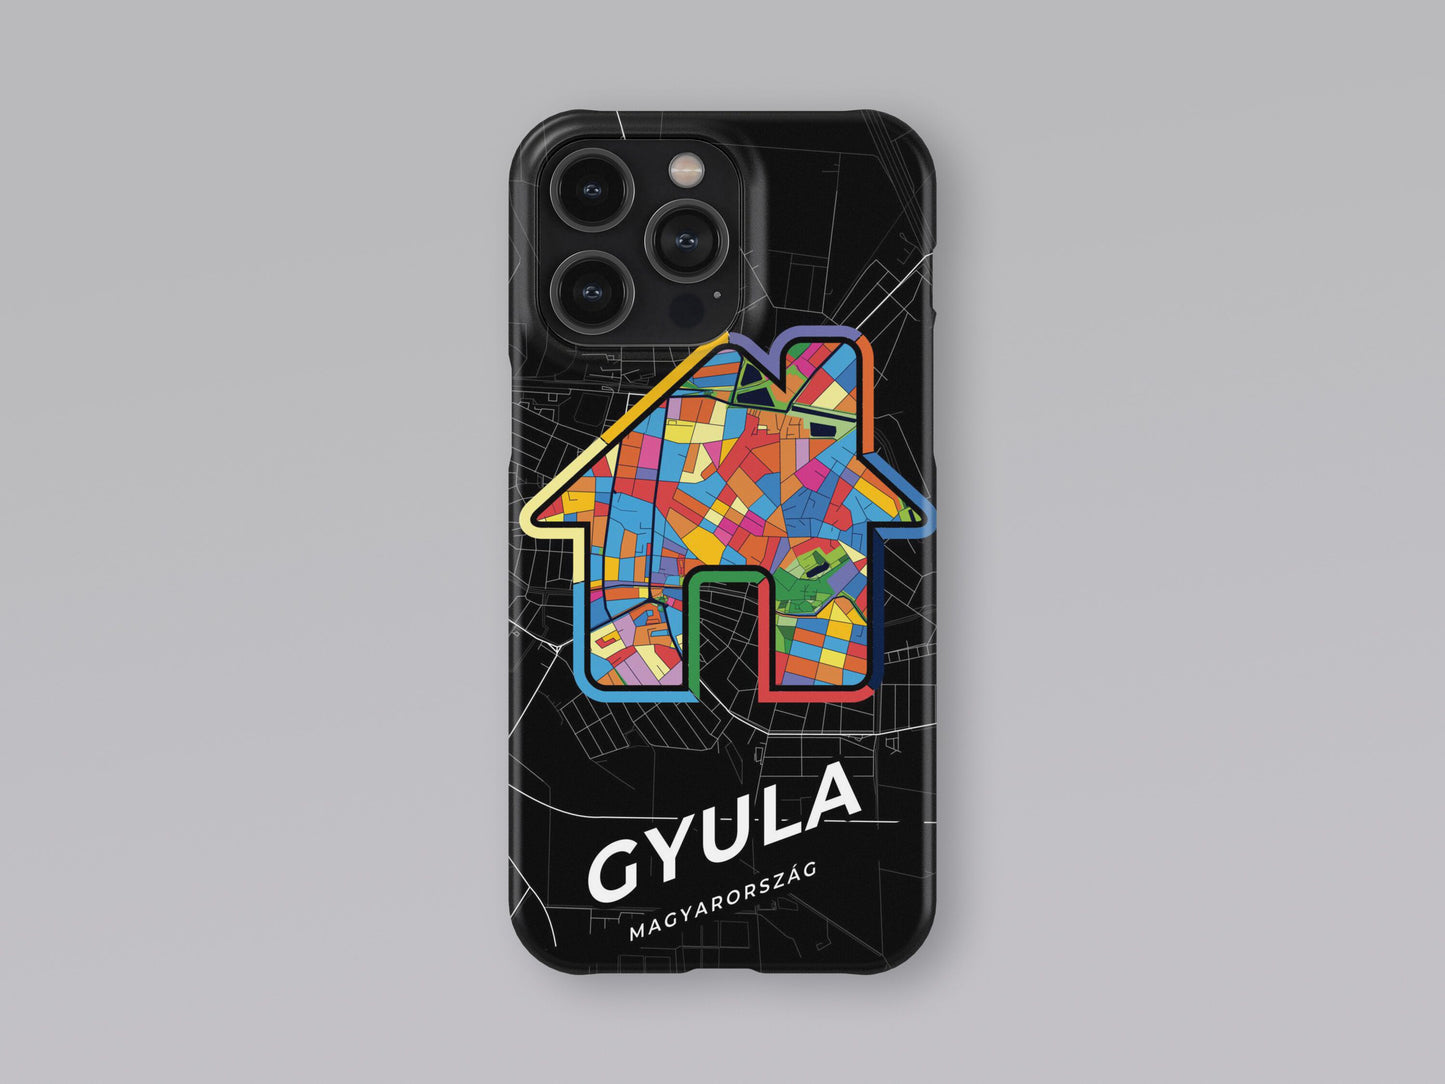 Gyula Hungary slim phone case with colorful icon. Birthday, wedding or housewarming gift. Couple match cases. 3